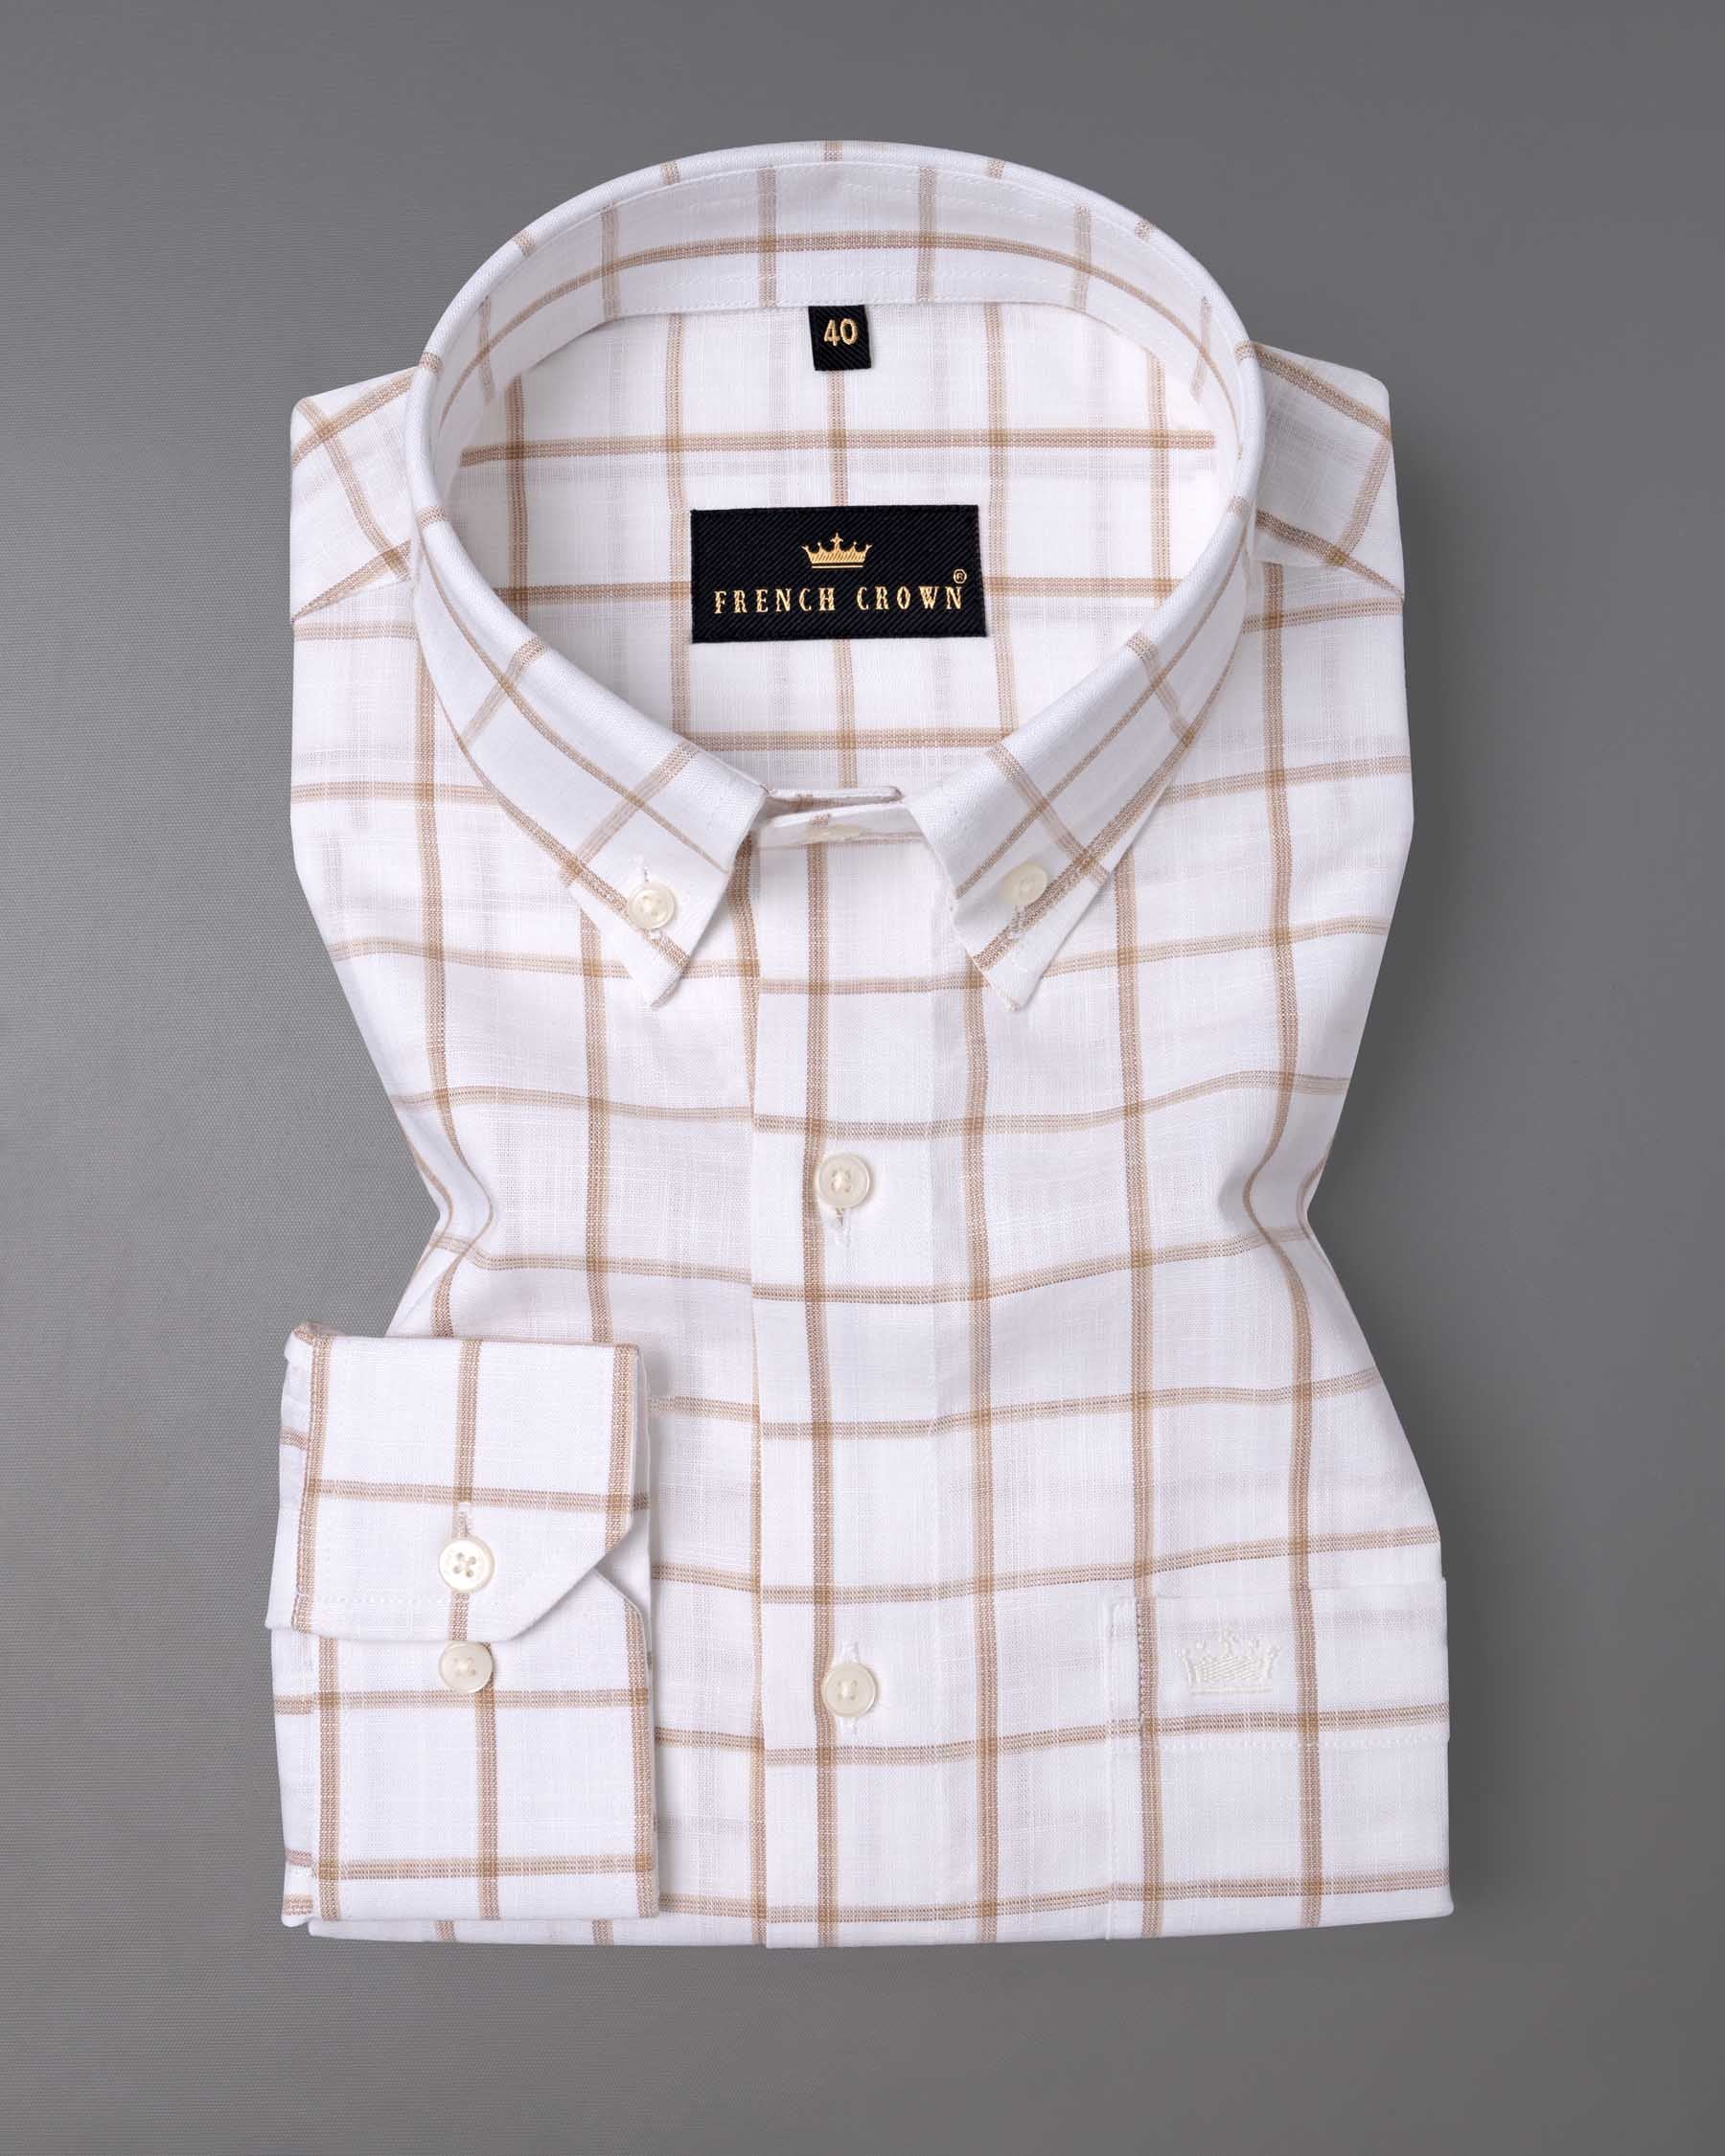 Bright white with brown Windowpane Luxurious Linen shirt 6287-BD-38, 6287-BD-H-38, 6287-BD-39, 6287-BD-H-39, 6287-BD-40, 6287-BD-H-40, 6287-BD-42, 6287-BD-H-42, 6287-BD-44, 6287-BD-H-44, 6287-BD-46, 6287-BD-H-46, 6287-BD-48, 6287-BD-H-48, 6287-BD-50, 6287-BD-H-50, 6287-BD-52, 6287-BD-H-52